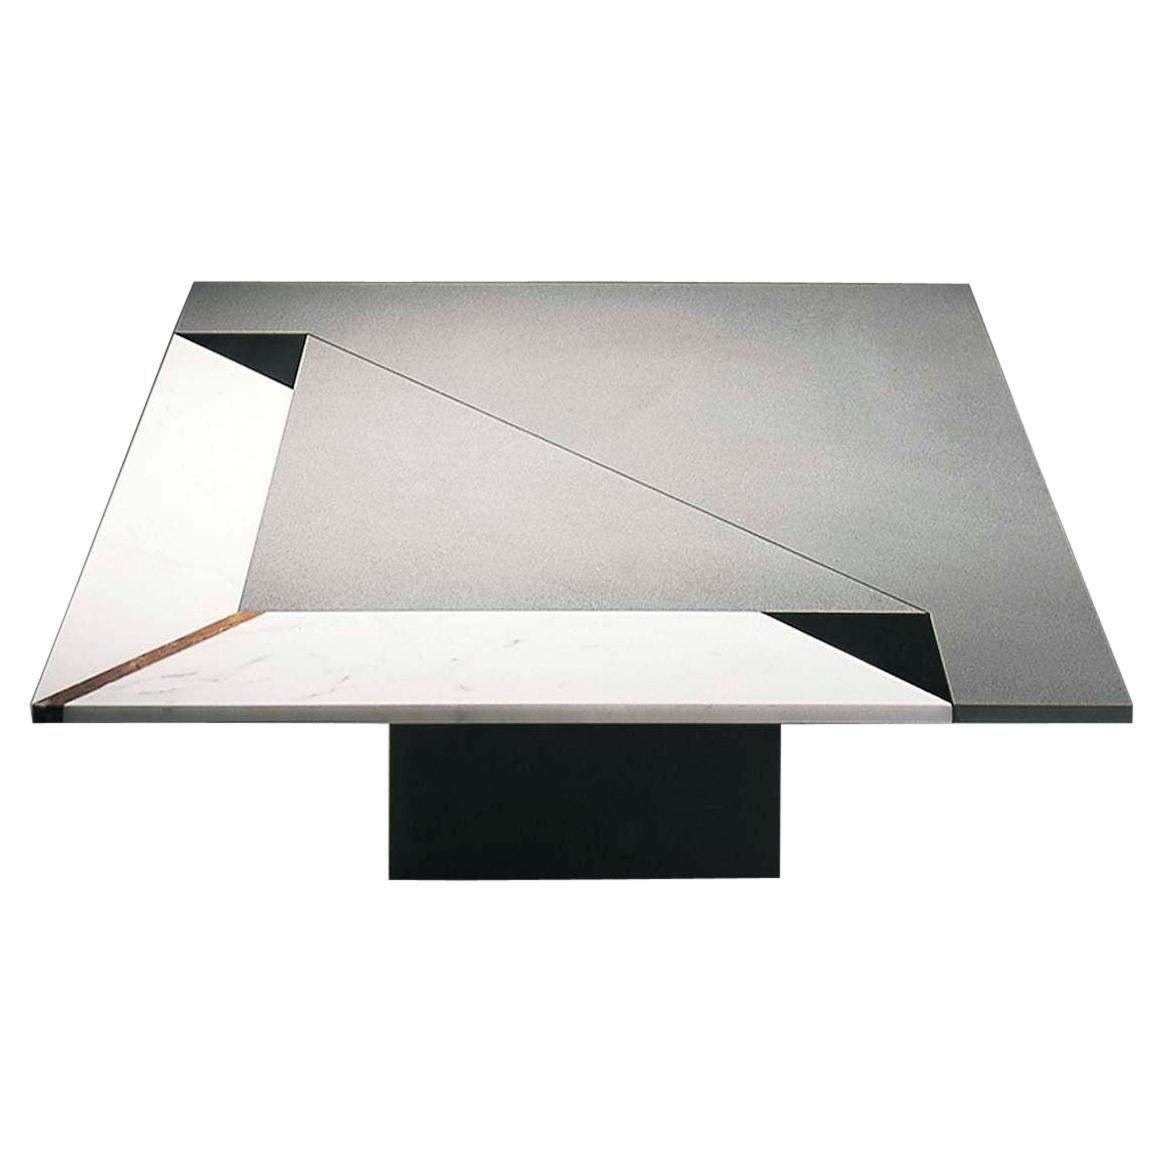 21st Century by Arch. R. Littel "INTARSIA FOLD" Square Marble Coffee Table